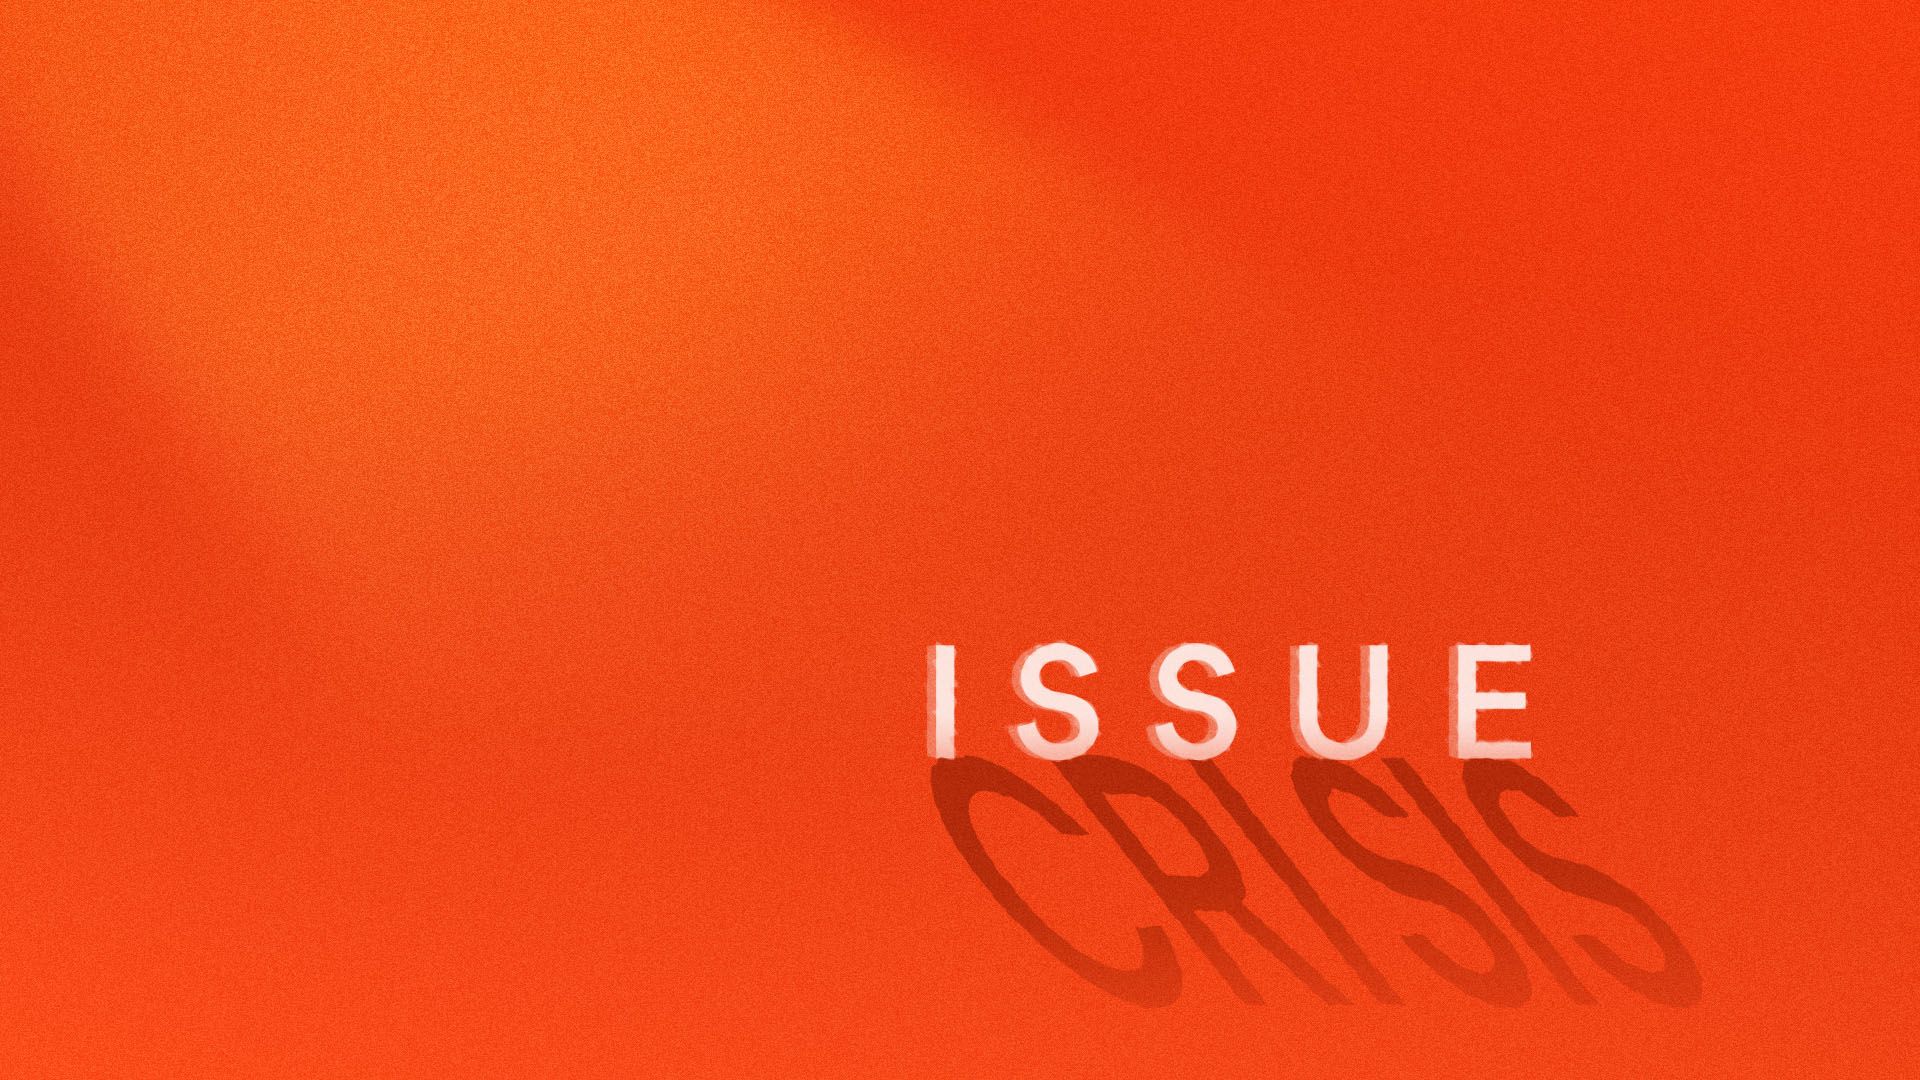 Illustration of the word "issue" casting a shadow that reads "crisis"